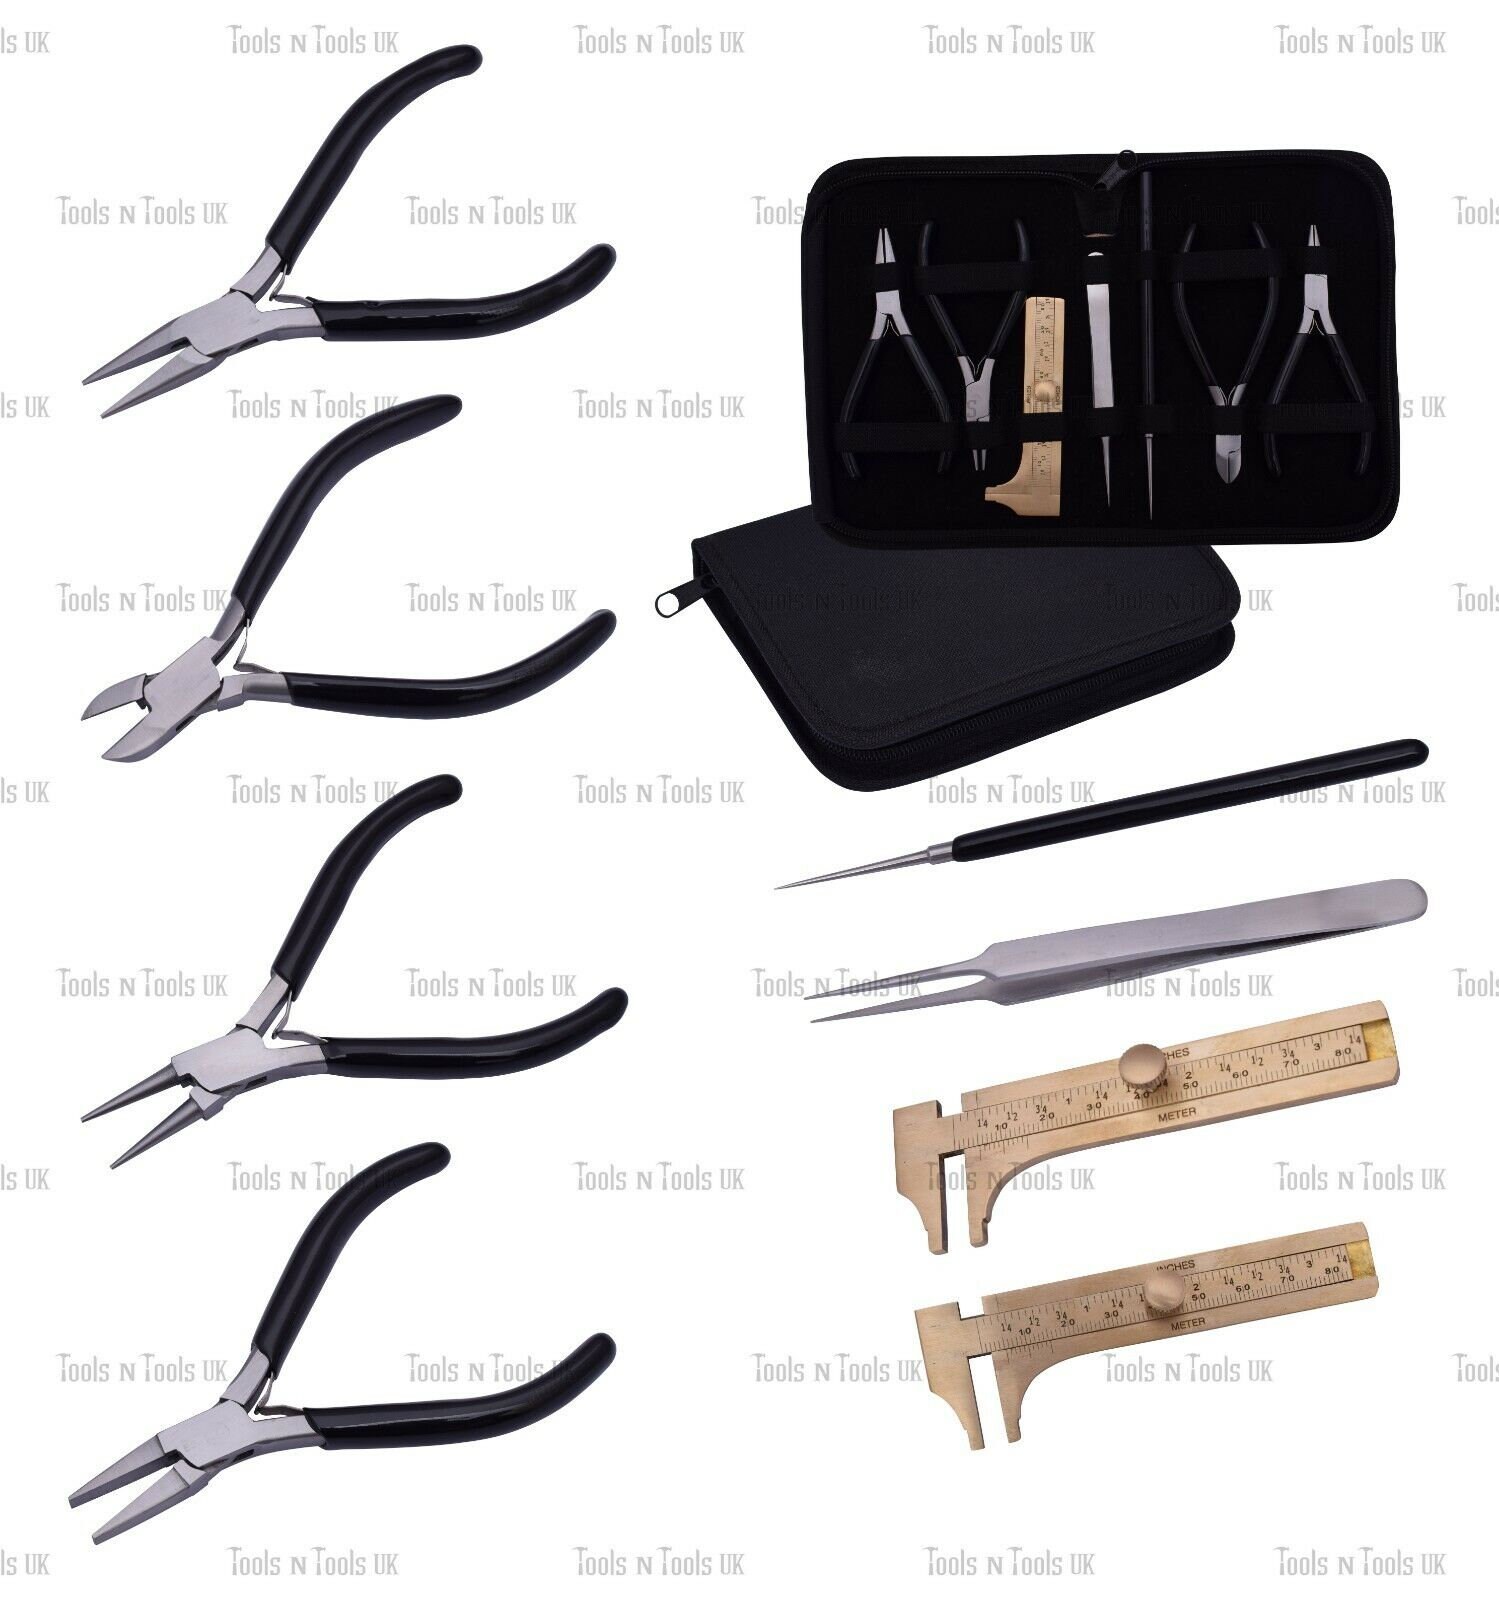 6 Piece Jewelry Tool Kit, Jewelry Pliers, Pliers and Vernier Calliper  Measuring Tool, Basic Tools For Crafts & Jewelry Making, Beading Kit